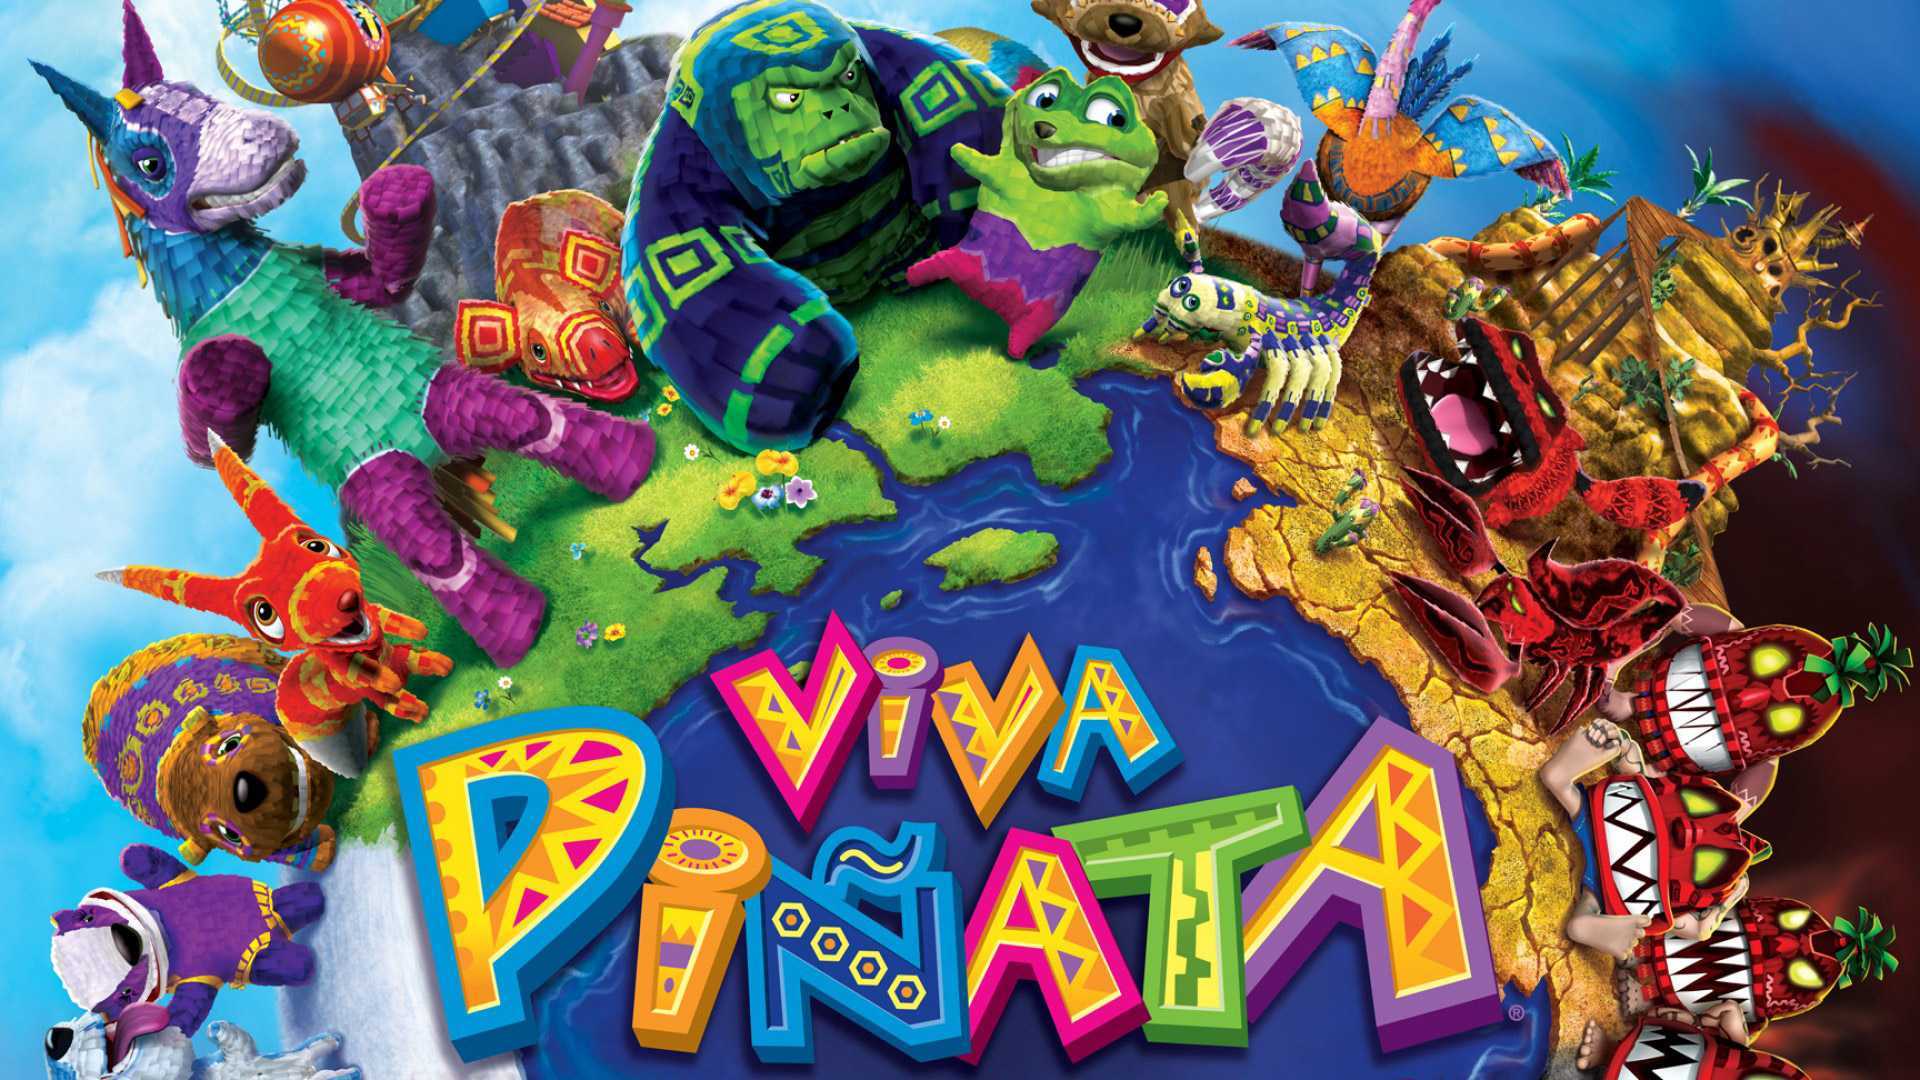 Viva piñata: trouble in paradise — strategywiki, the video game walkthrough and strategy guide wiki